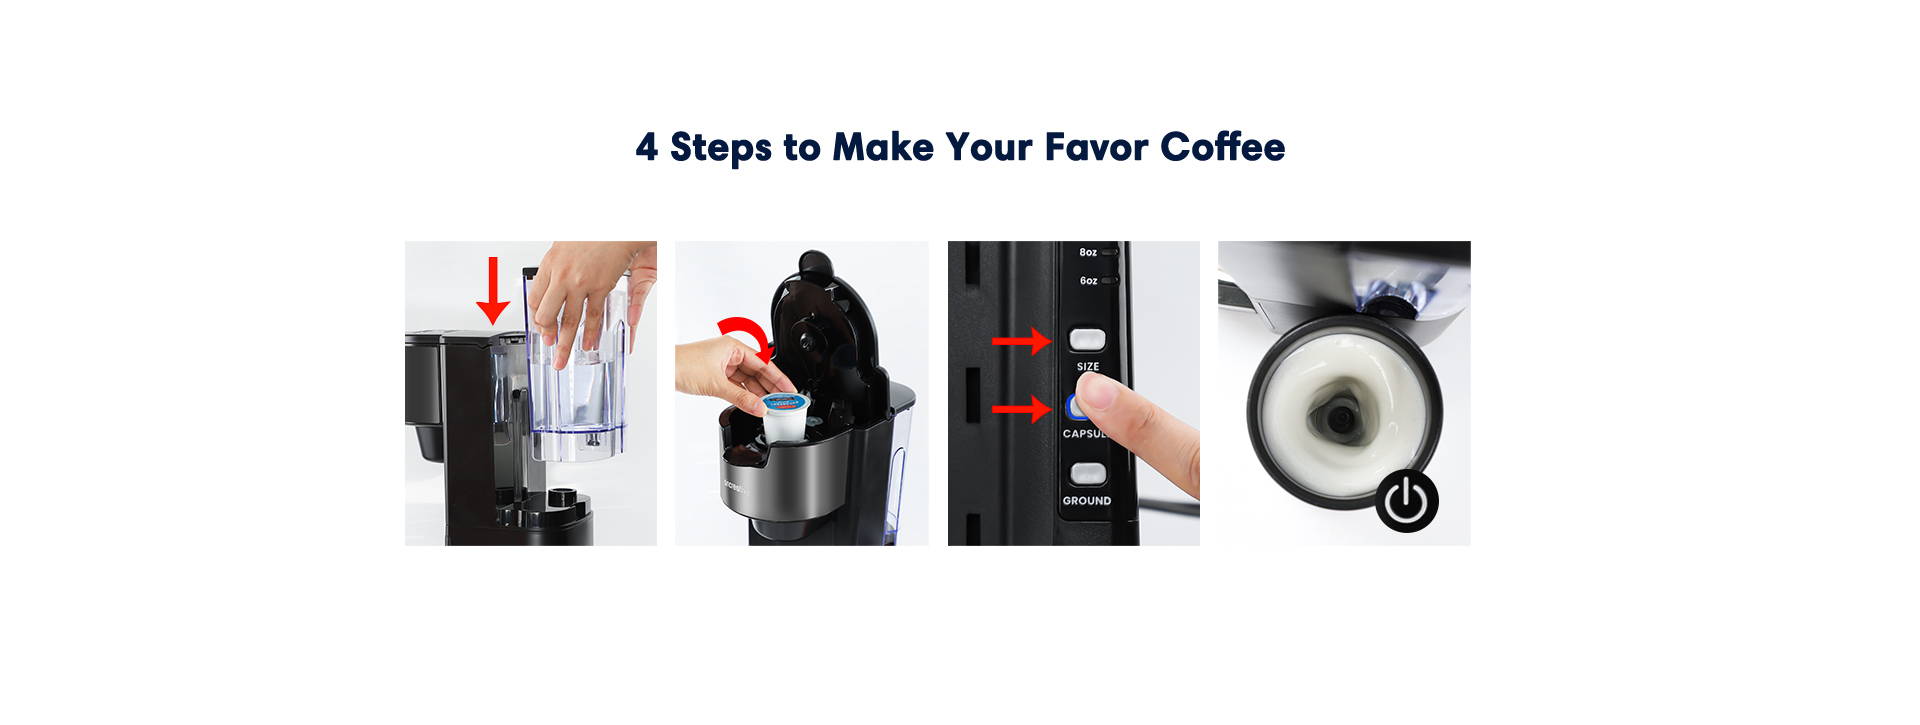 Sincreative KCM207 K-Cup Coffee Maker with Multi-functional Milk Frother